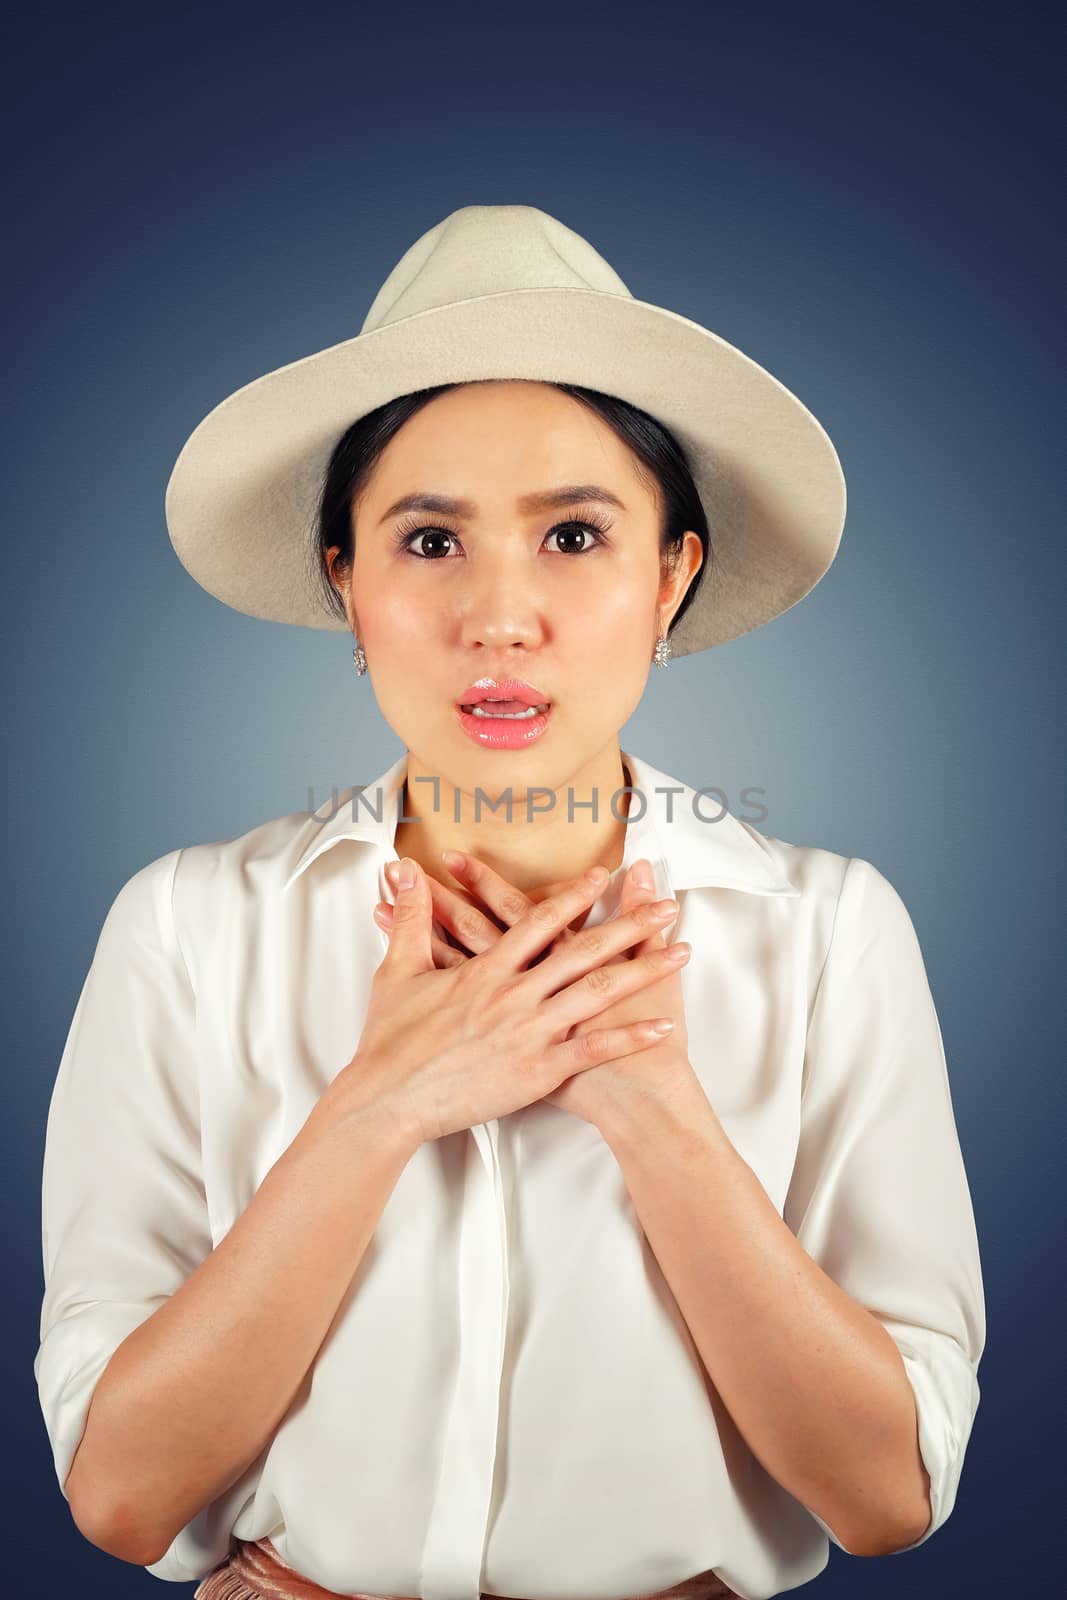 Shocked woman wearing stylish hat looking at camera and dark background